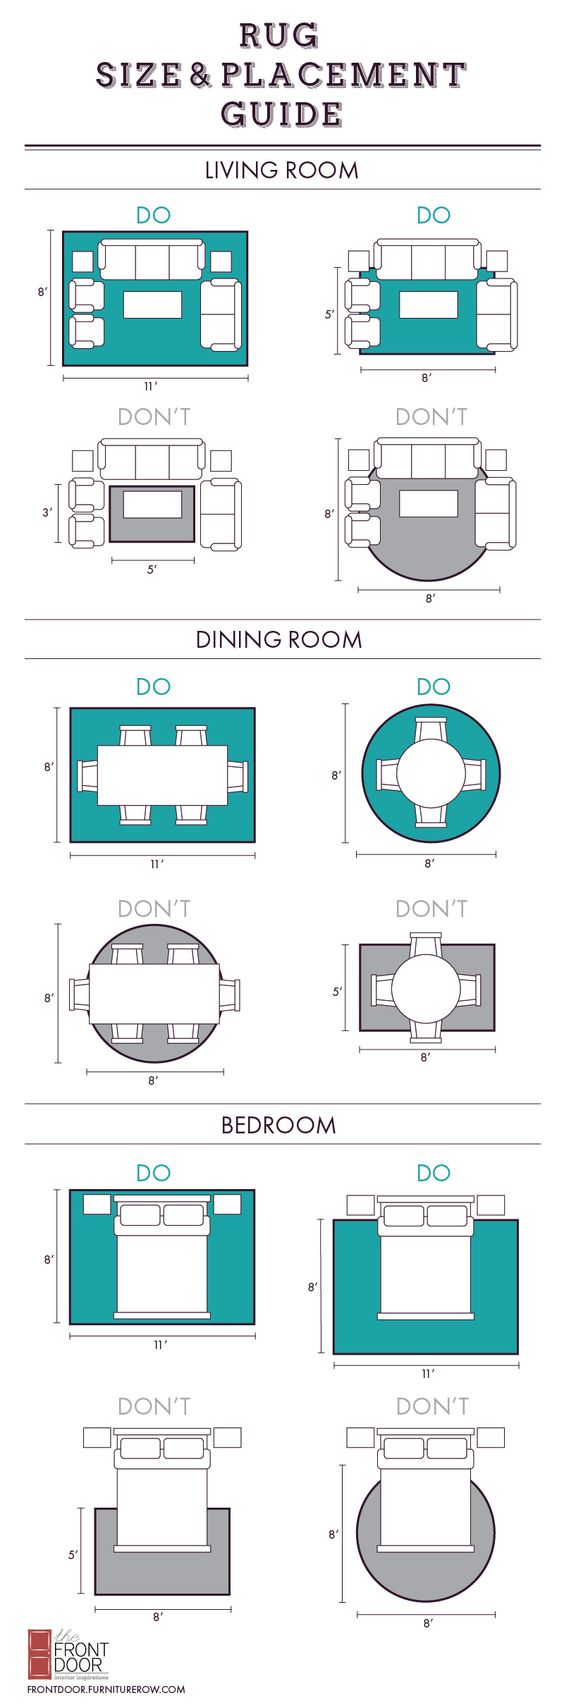 PRINTABLE Area rug size and placement guide on the Front Door blog.